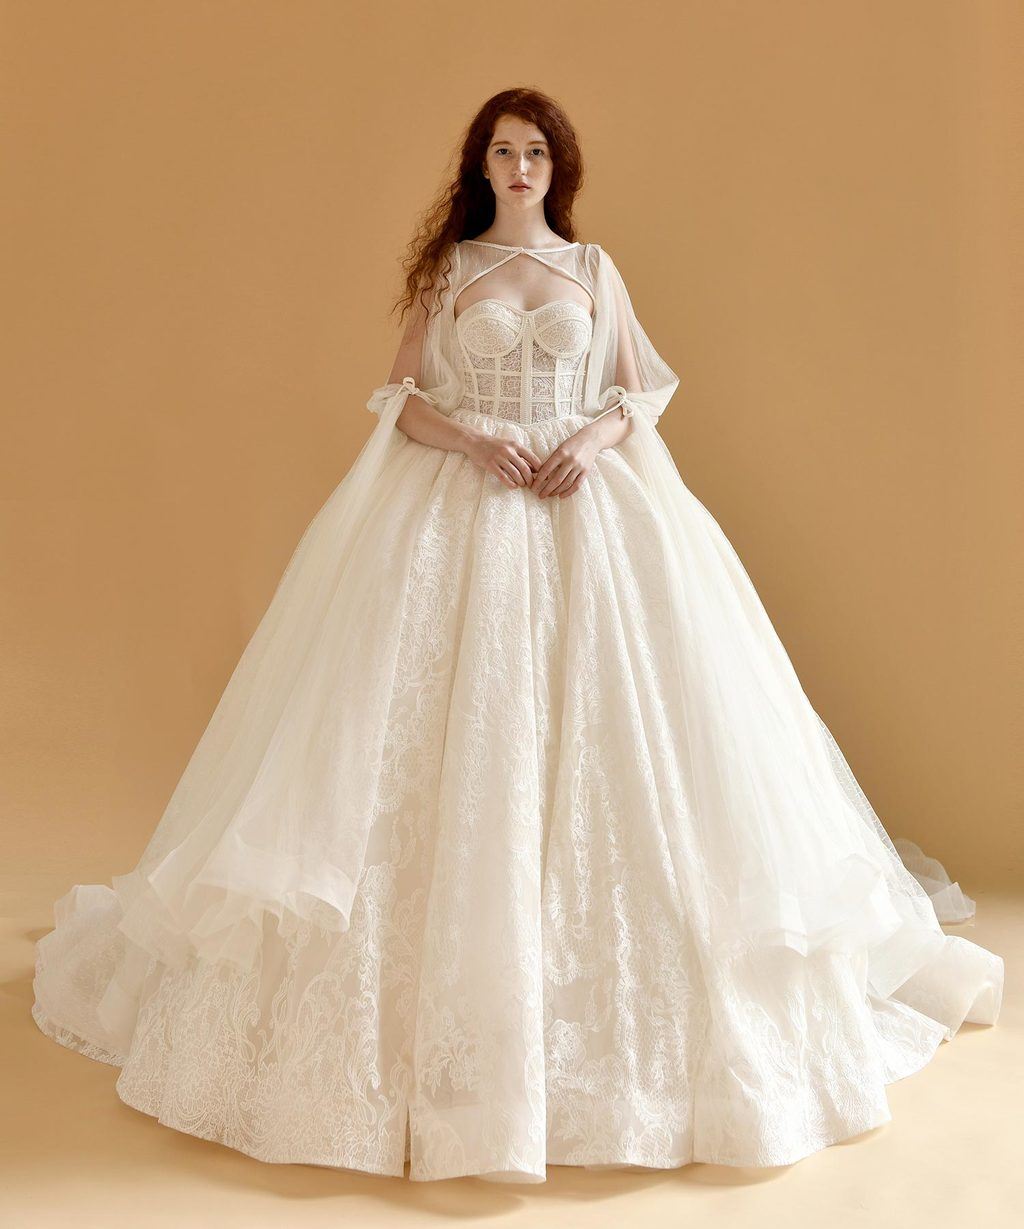 The Atelier Couture - Stylish Wedding, Bridal Dress, & Gowns Collections